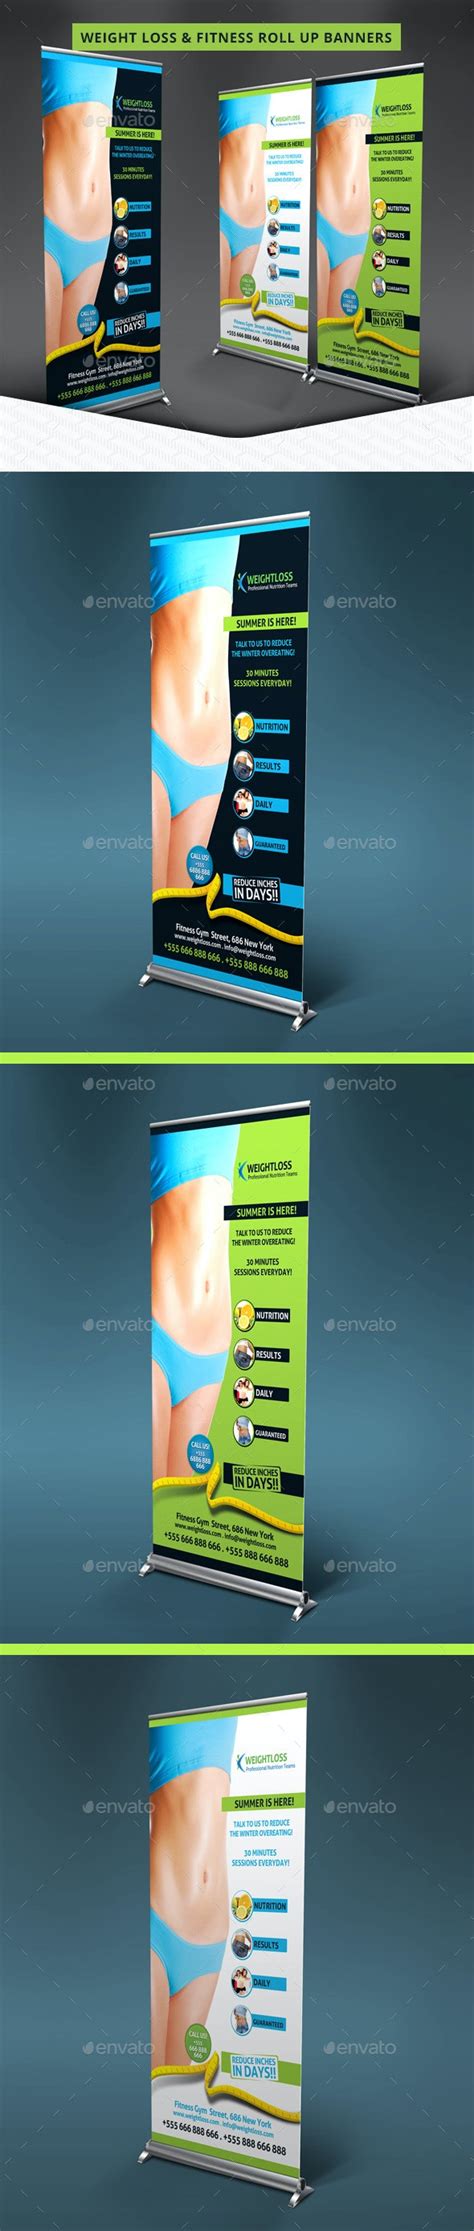 Weight Loss And Fitness Roll Up Banners By Hollymolly Graphicriver